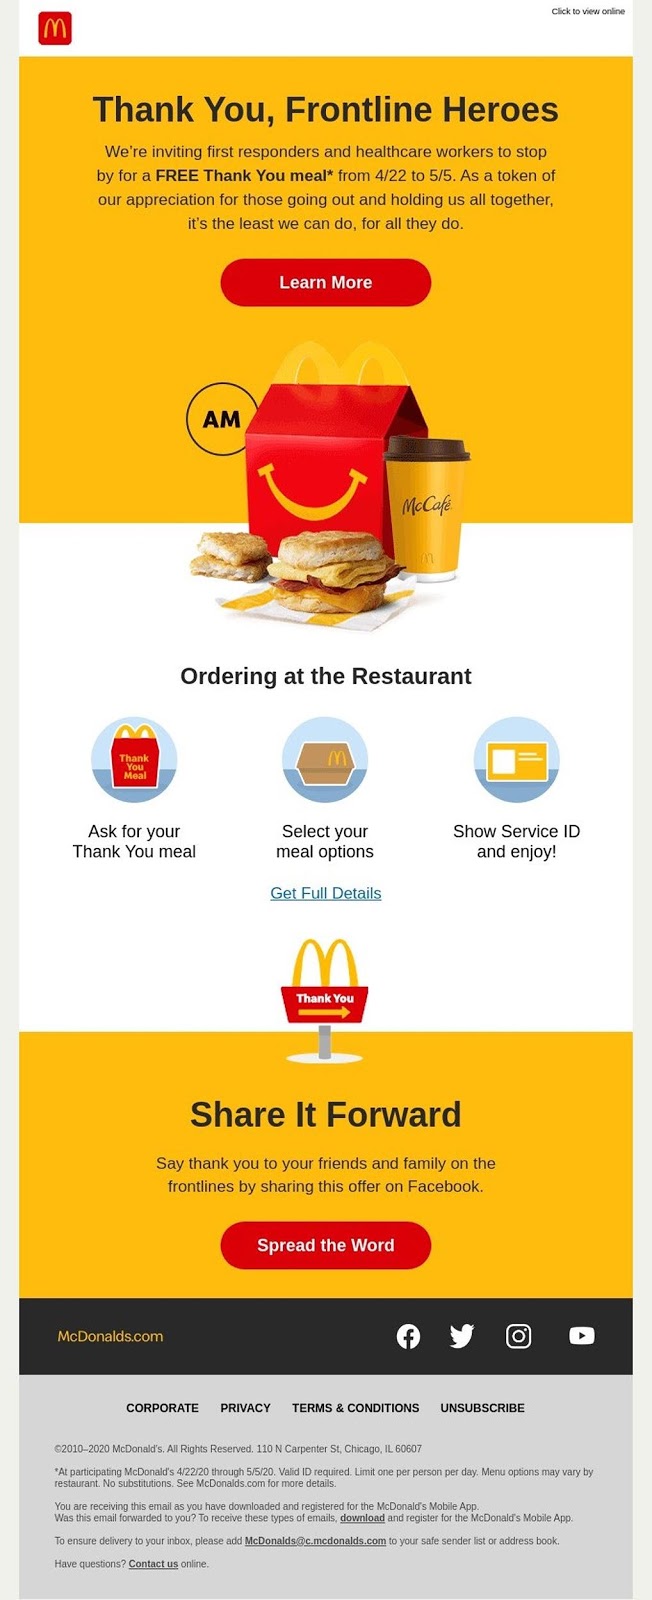 McDonalds’ email campaign thanks frontline workers and stays true to its brand with consistent golden arches messaging.